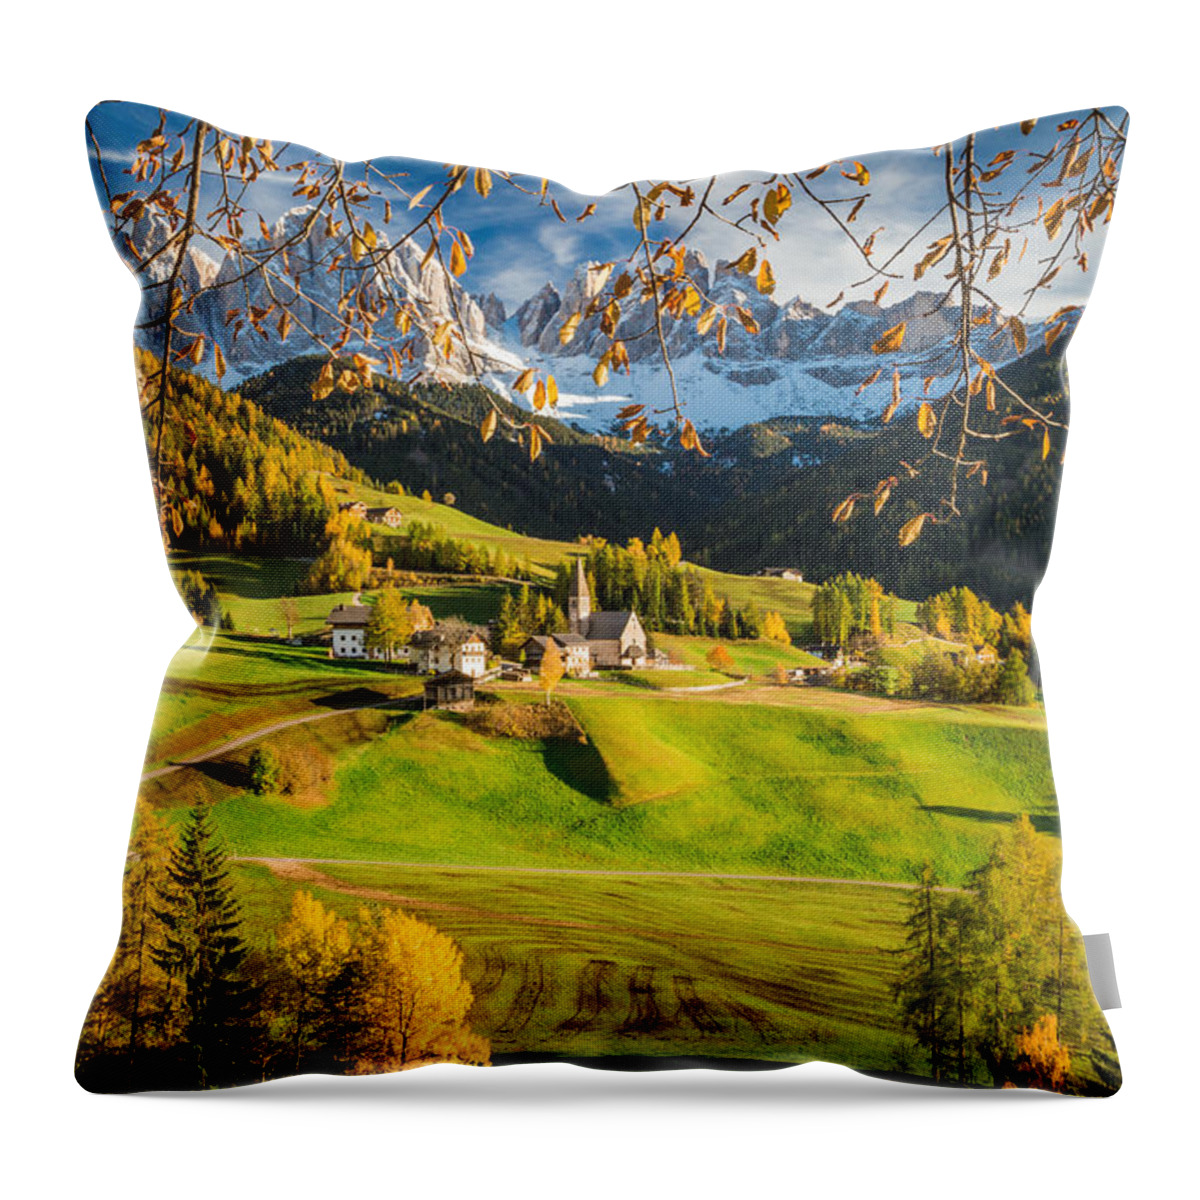 Dolomites Throw Pillow featuring the photograph Dolomites #2 by Stefano Termanini